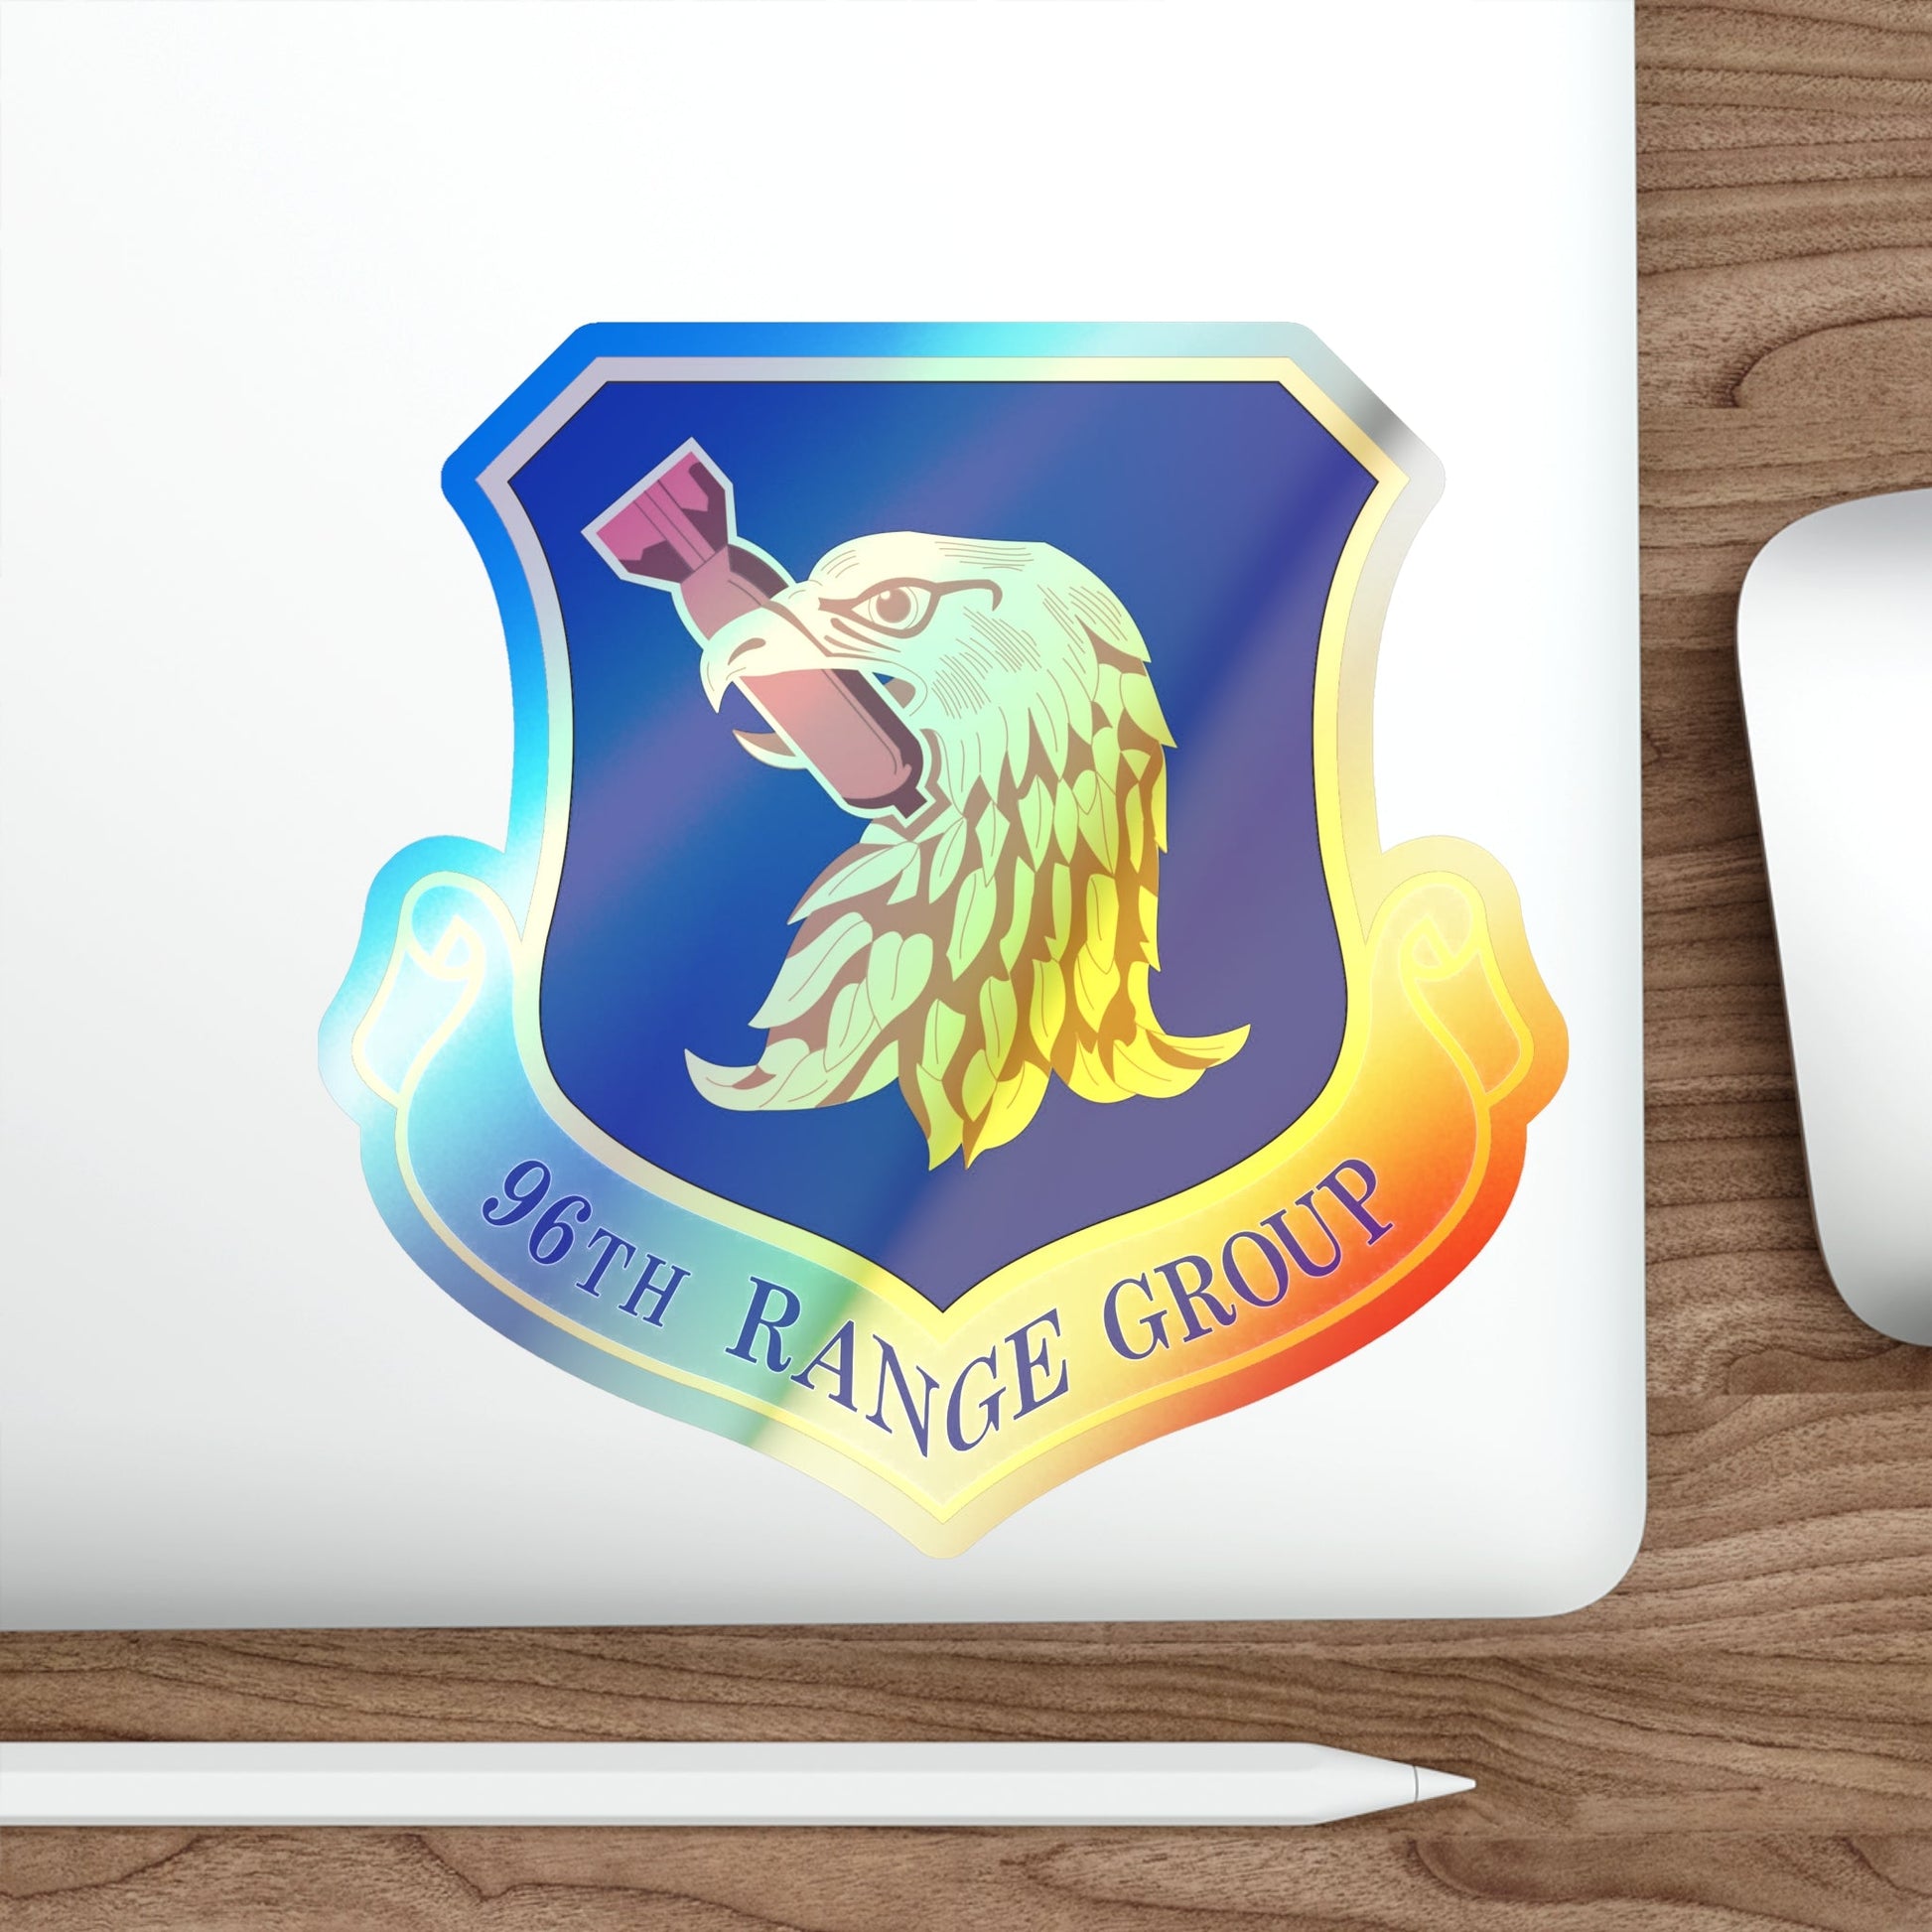 96th Range Group (U.S. Air Force) Holographic STICKER Die-Cut Vinyl Decal-The Sticker Space